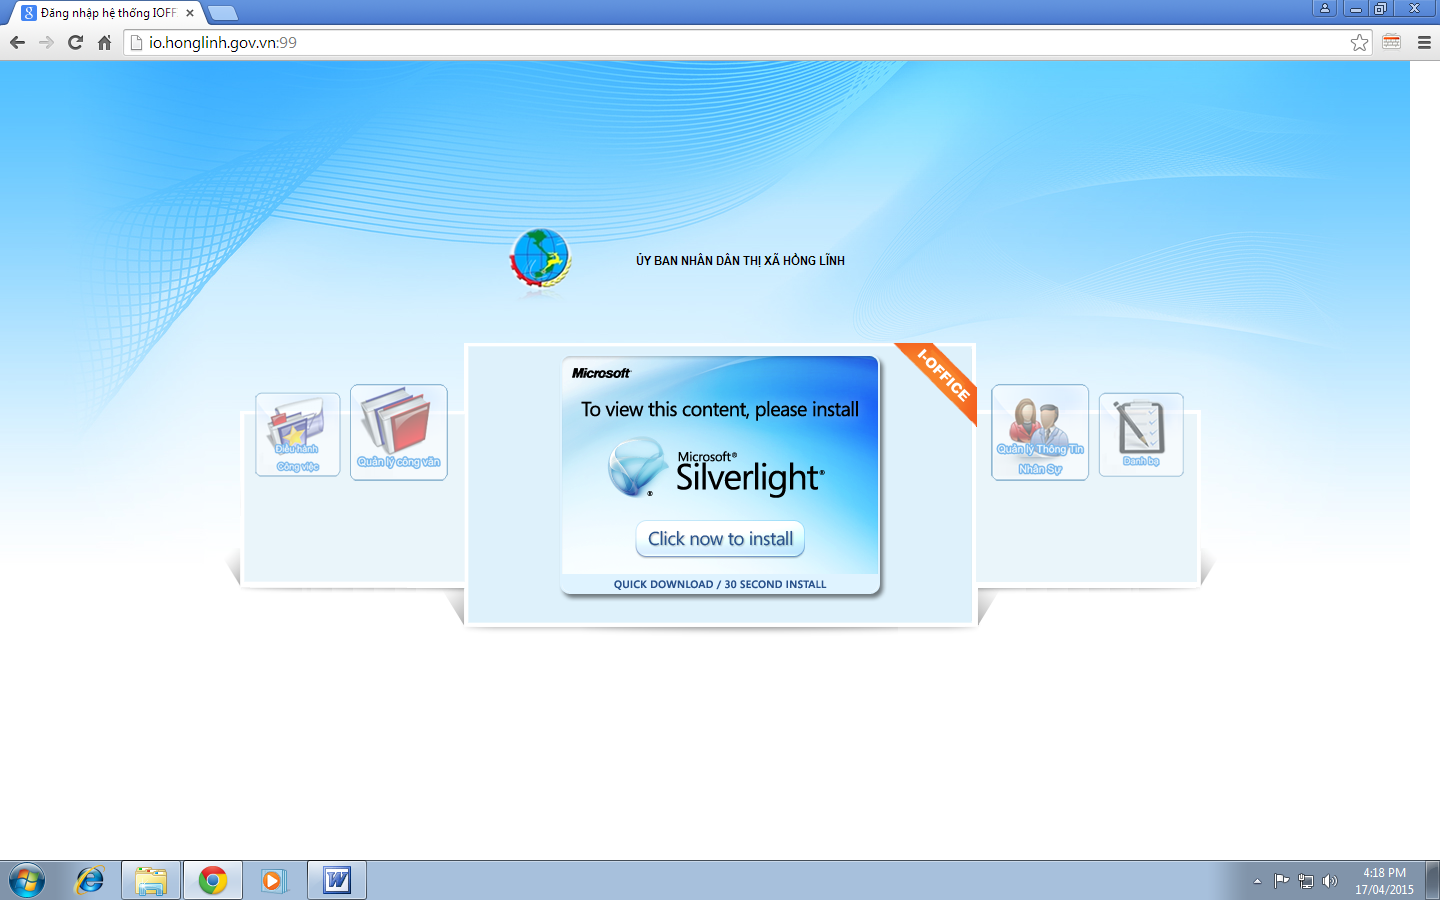 silverlight for chrome download